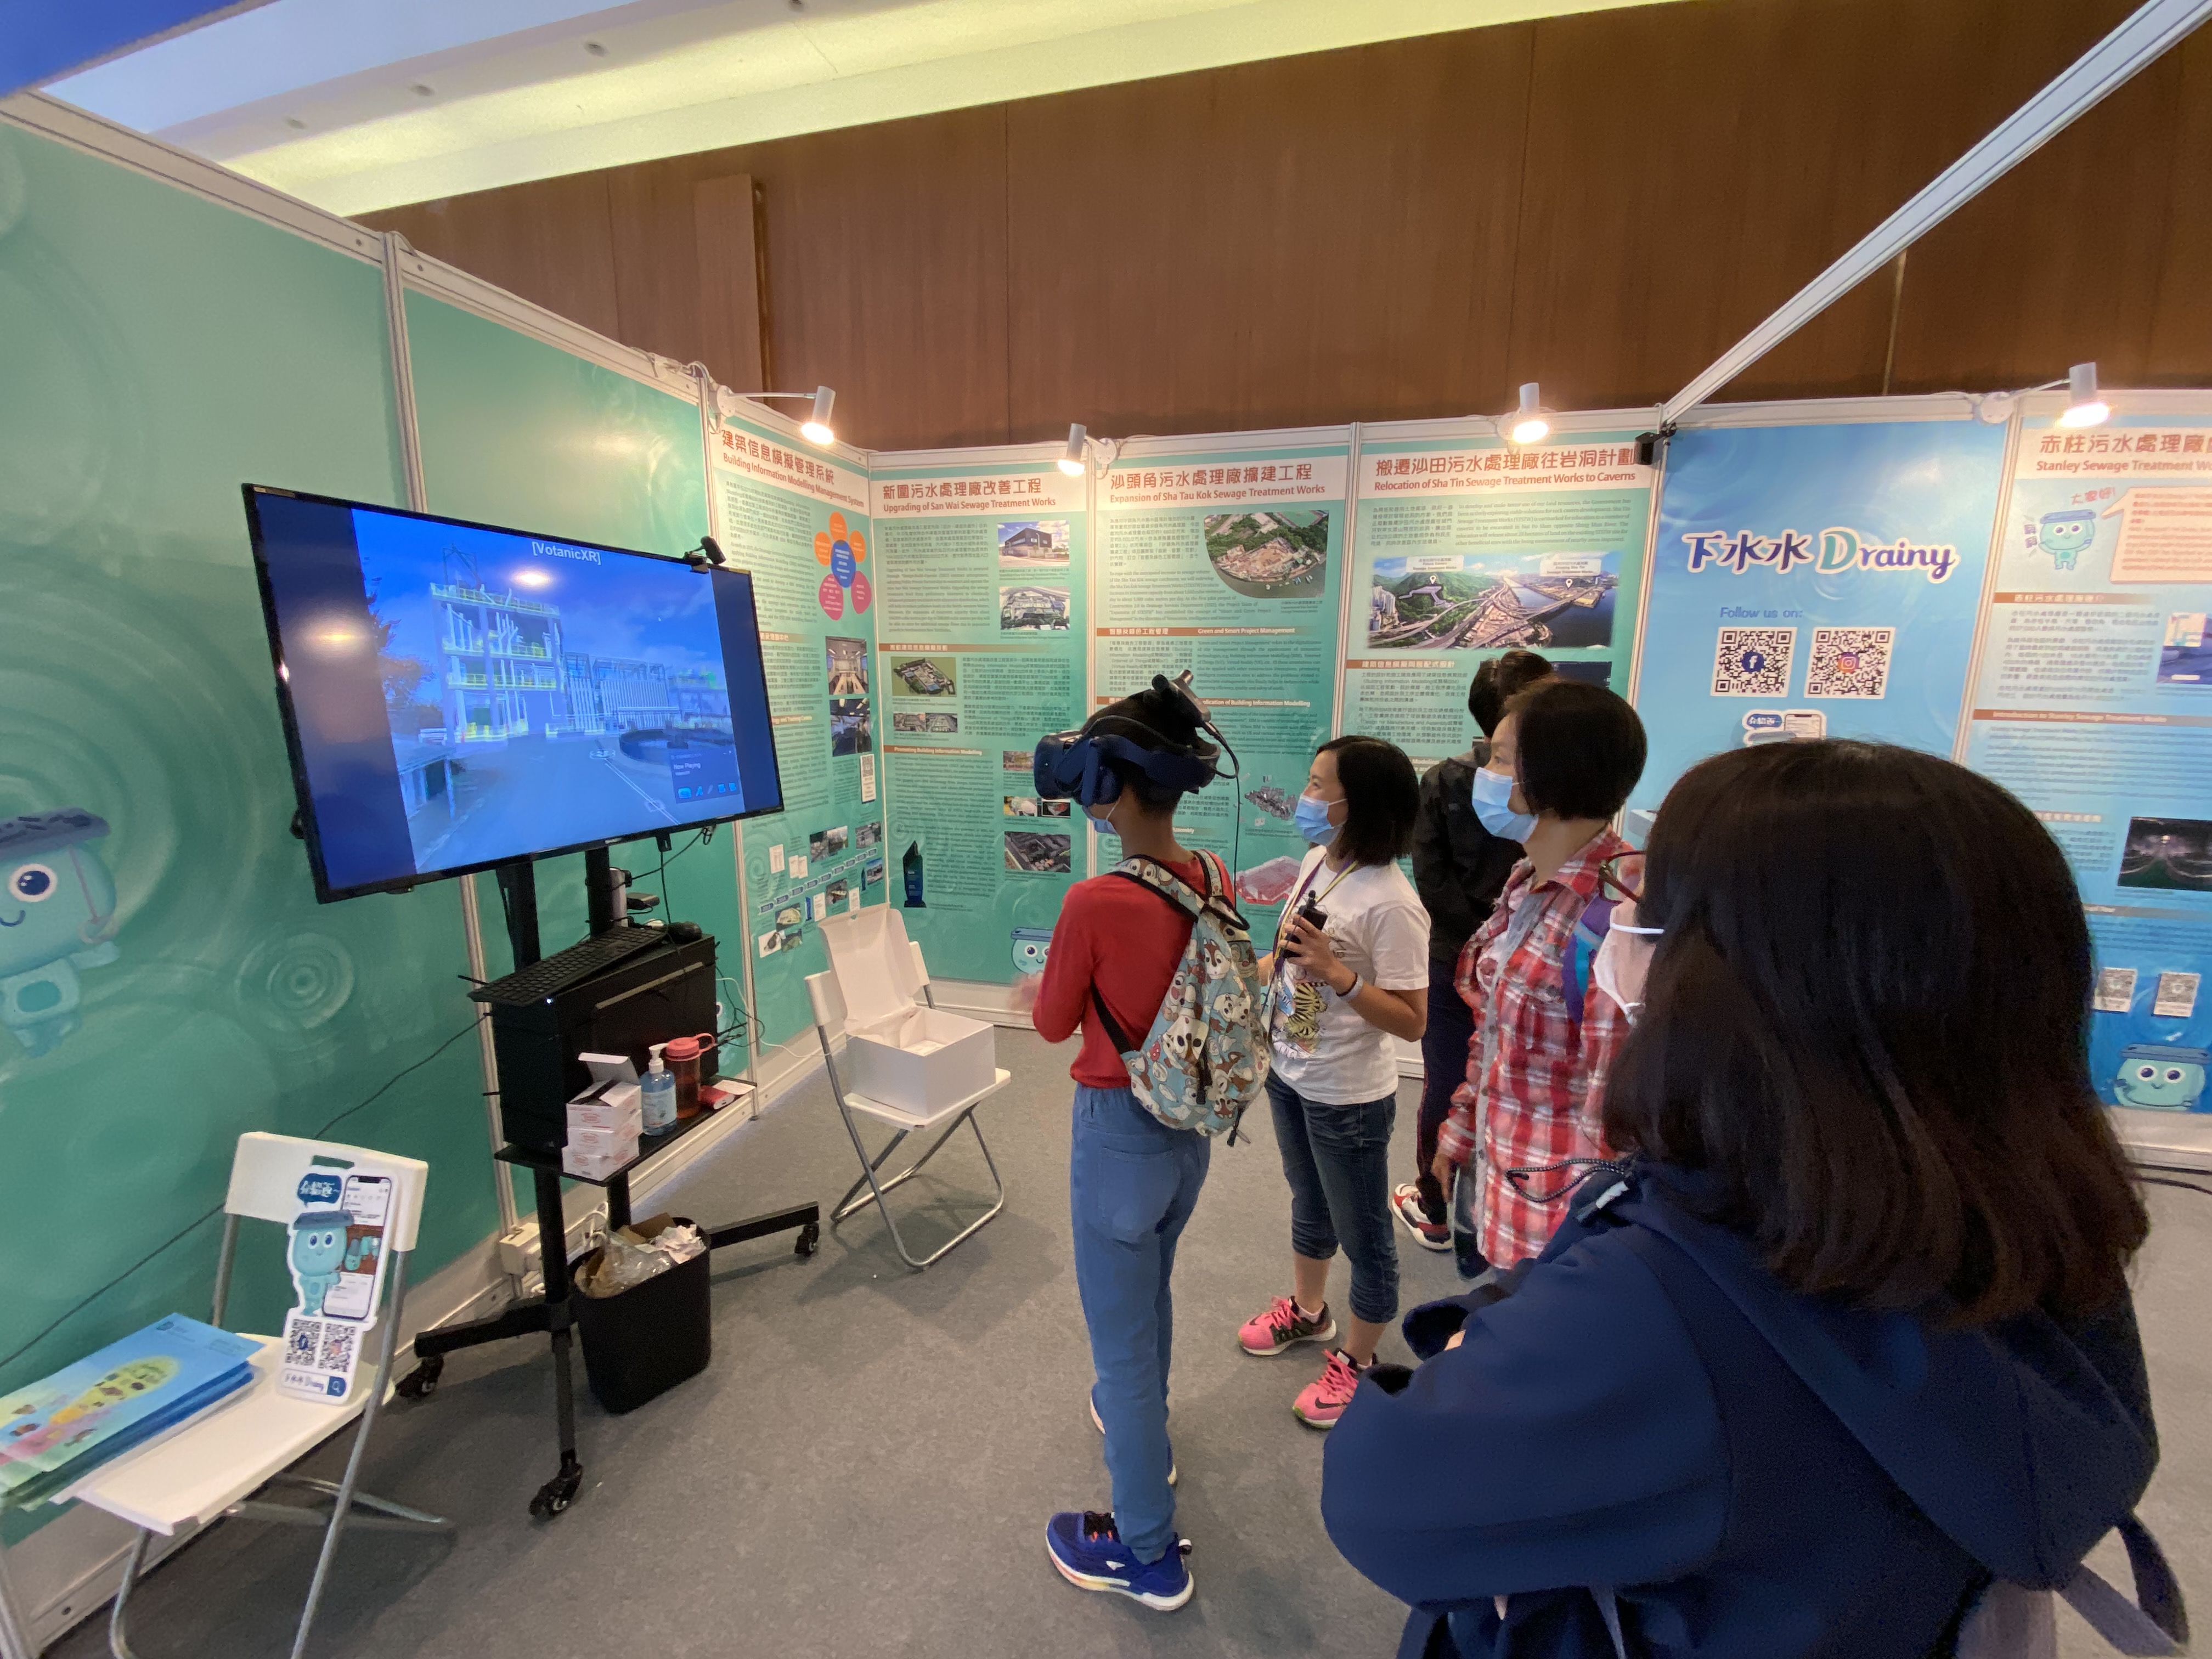 Visitors familiarized DSD’s project with the aid of VR technology